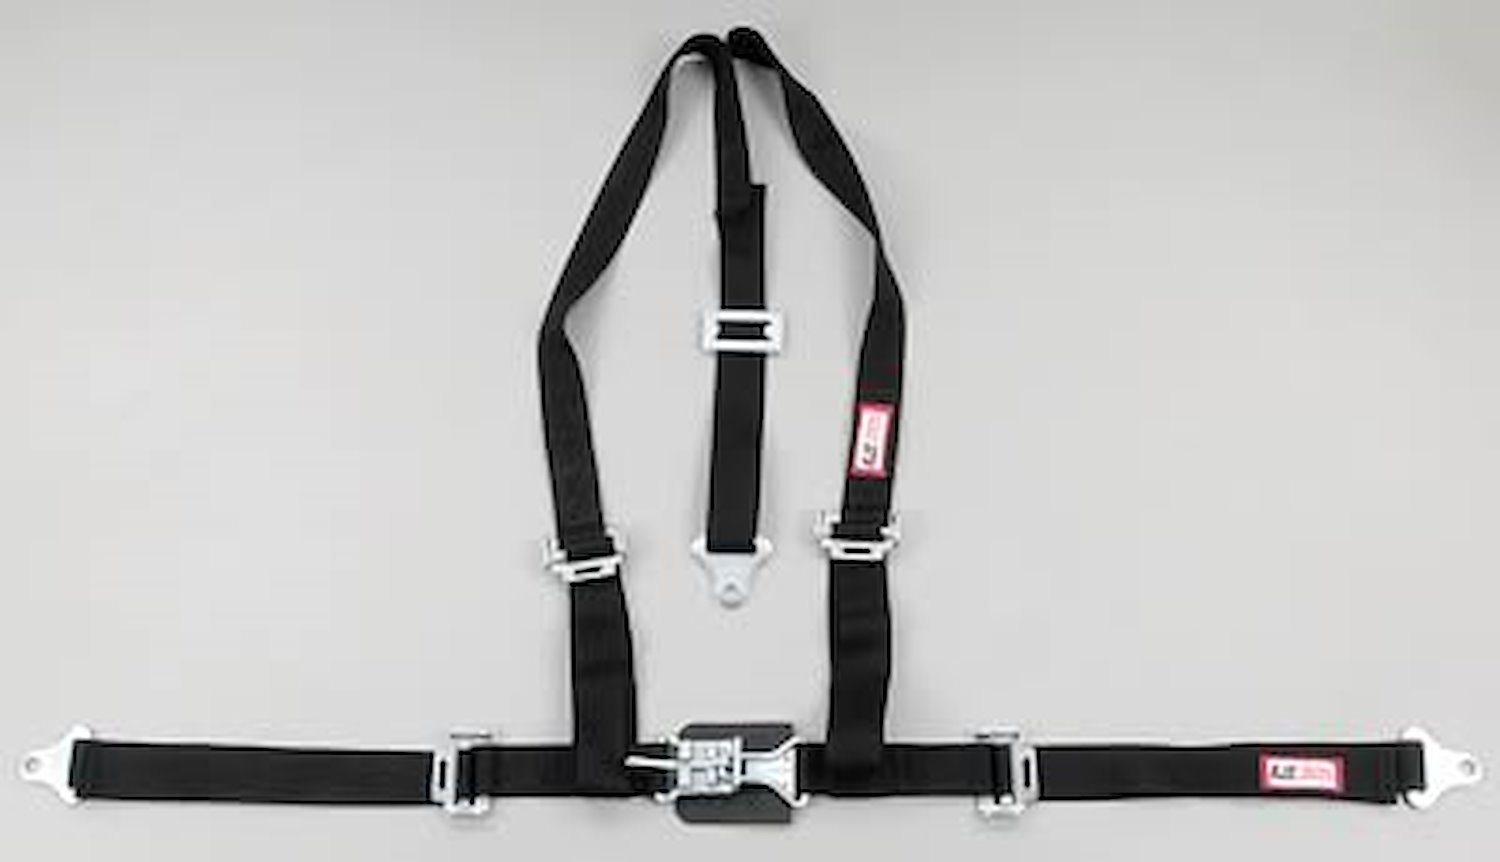 NON-SFI L&L HARNESS 3 PULL DOWN Lap Belt SEWN IN 2 Shoulder Harness V ROLL BAR Mount ALL SNAP ENDS BLACK